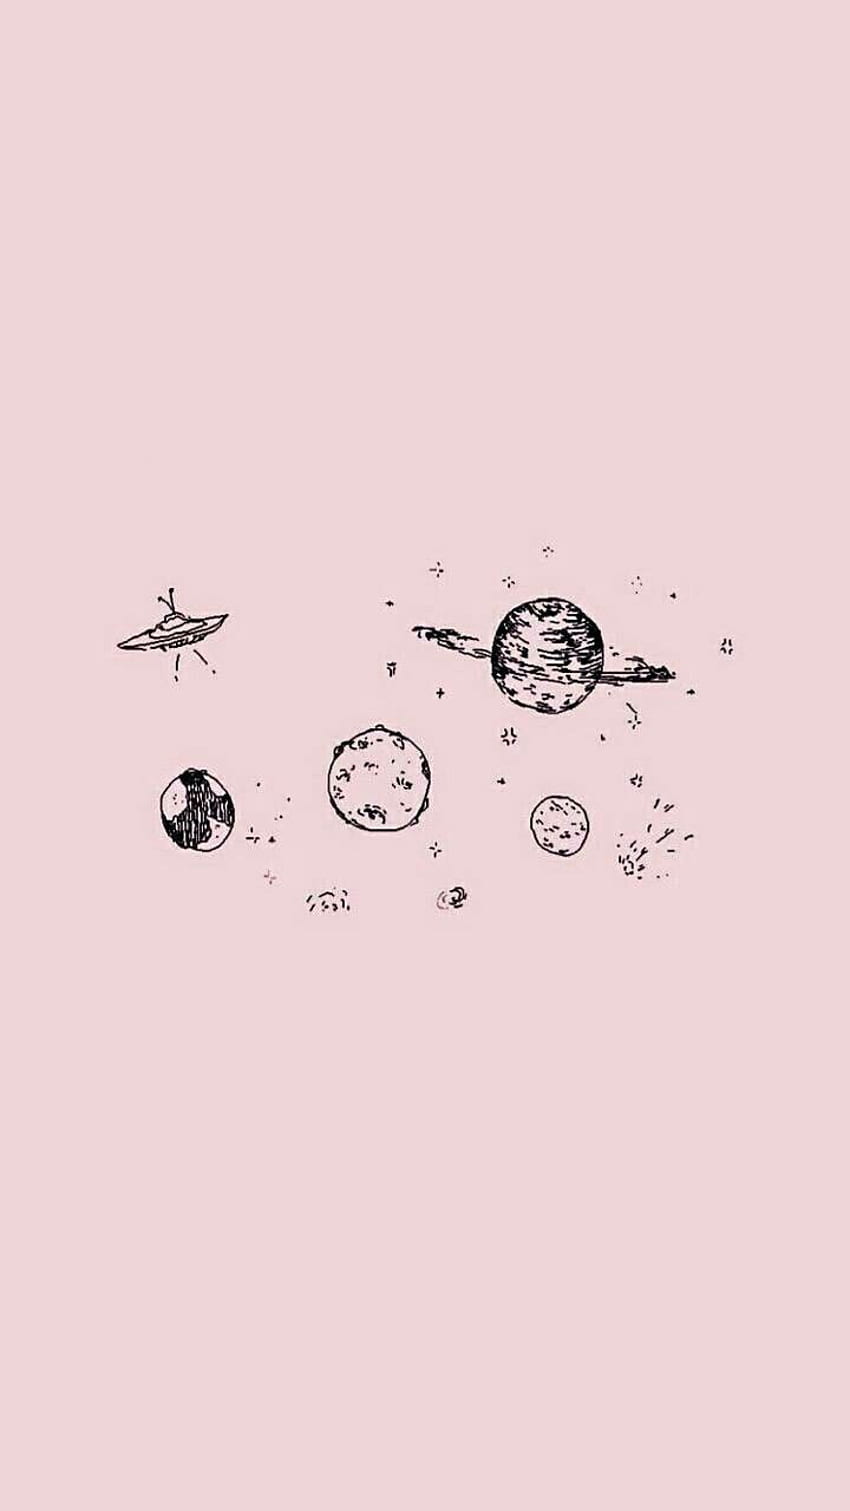 A drawing of planets and stars on pink background - Punk